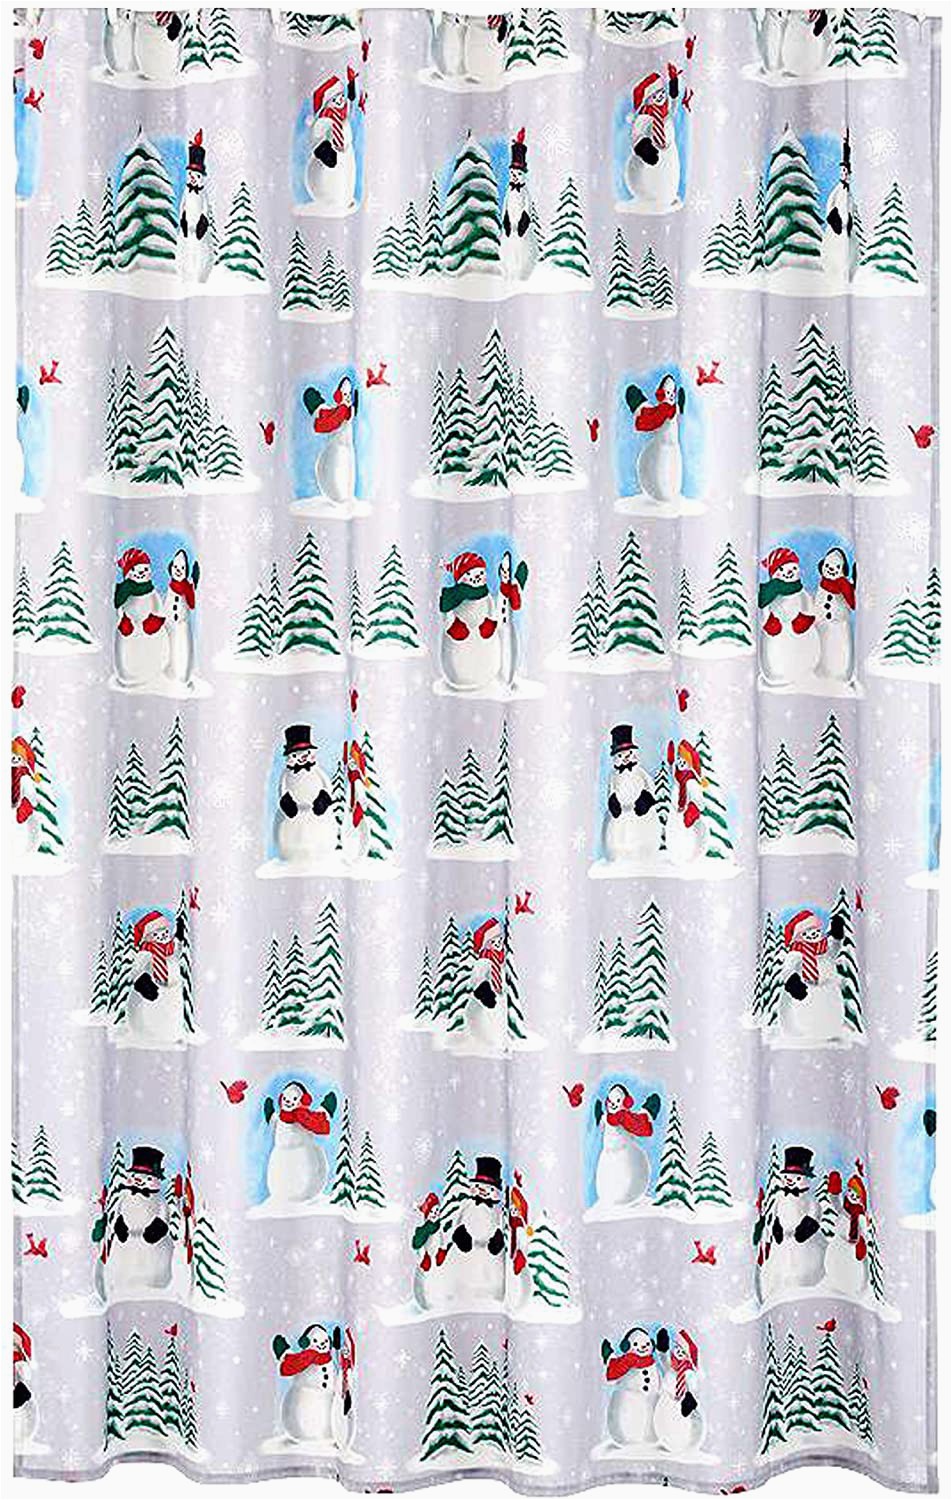 Christmas Bathroom Rugs and towels Duschvorhänge Winter Cardinals Christmas Bathroom Collection